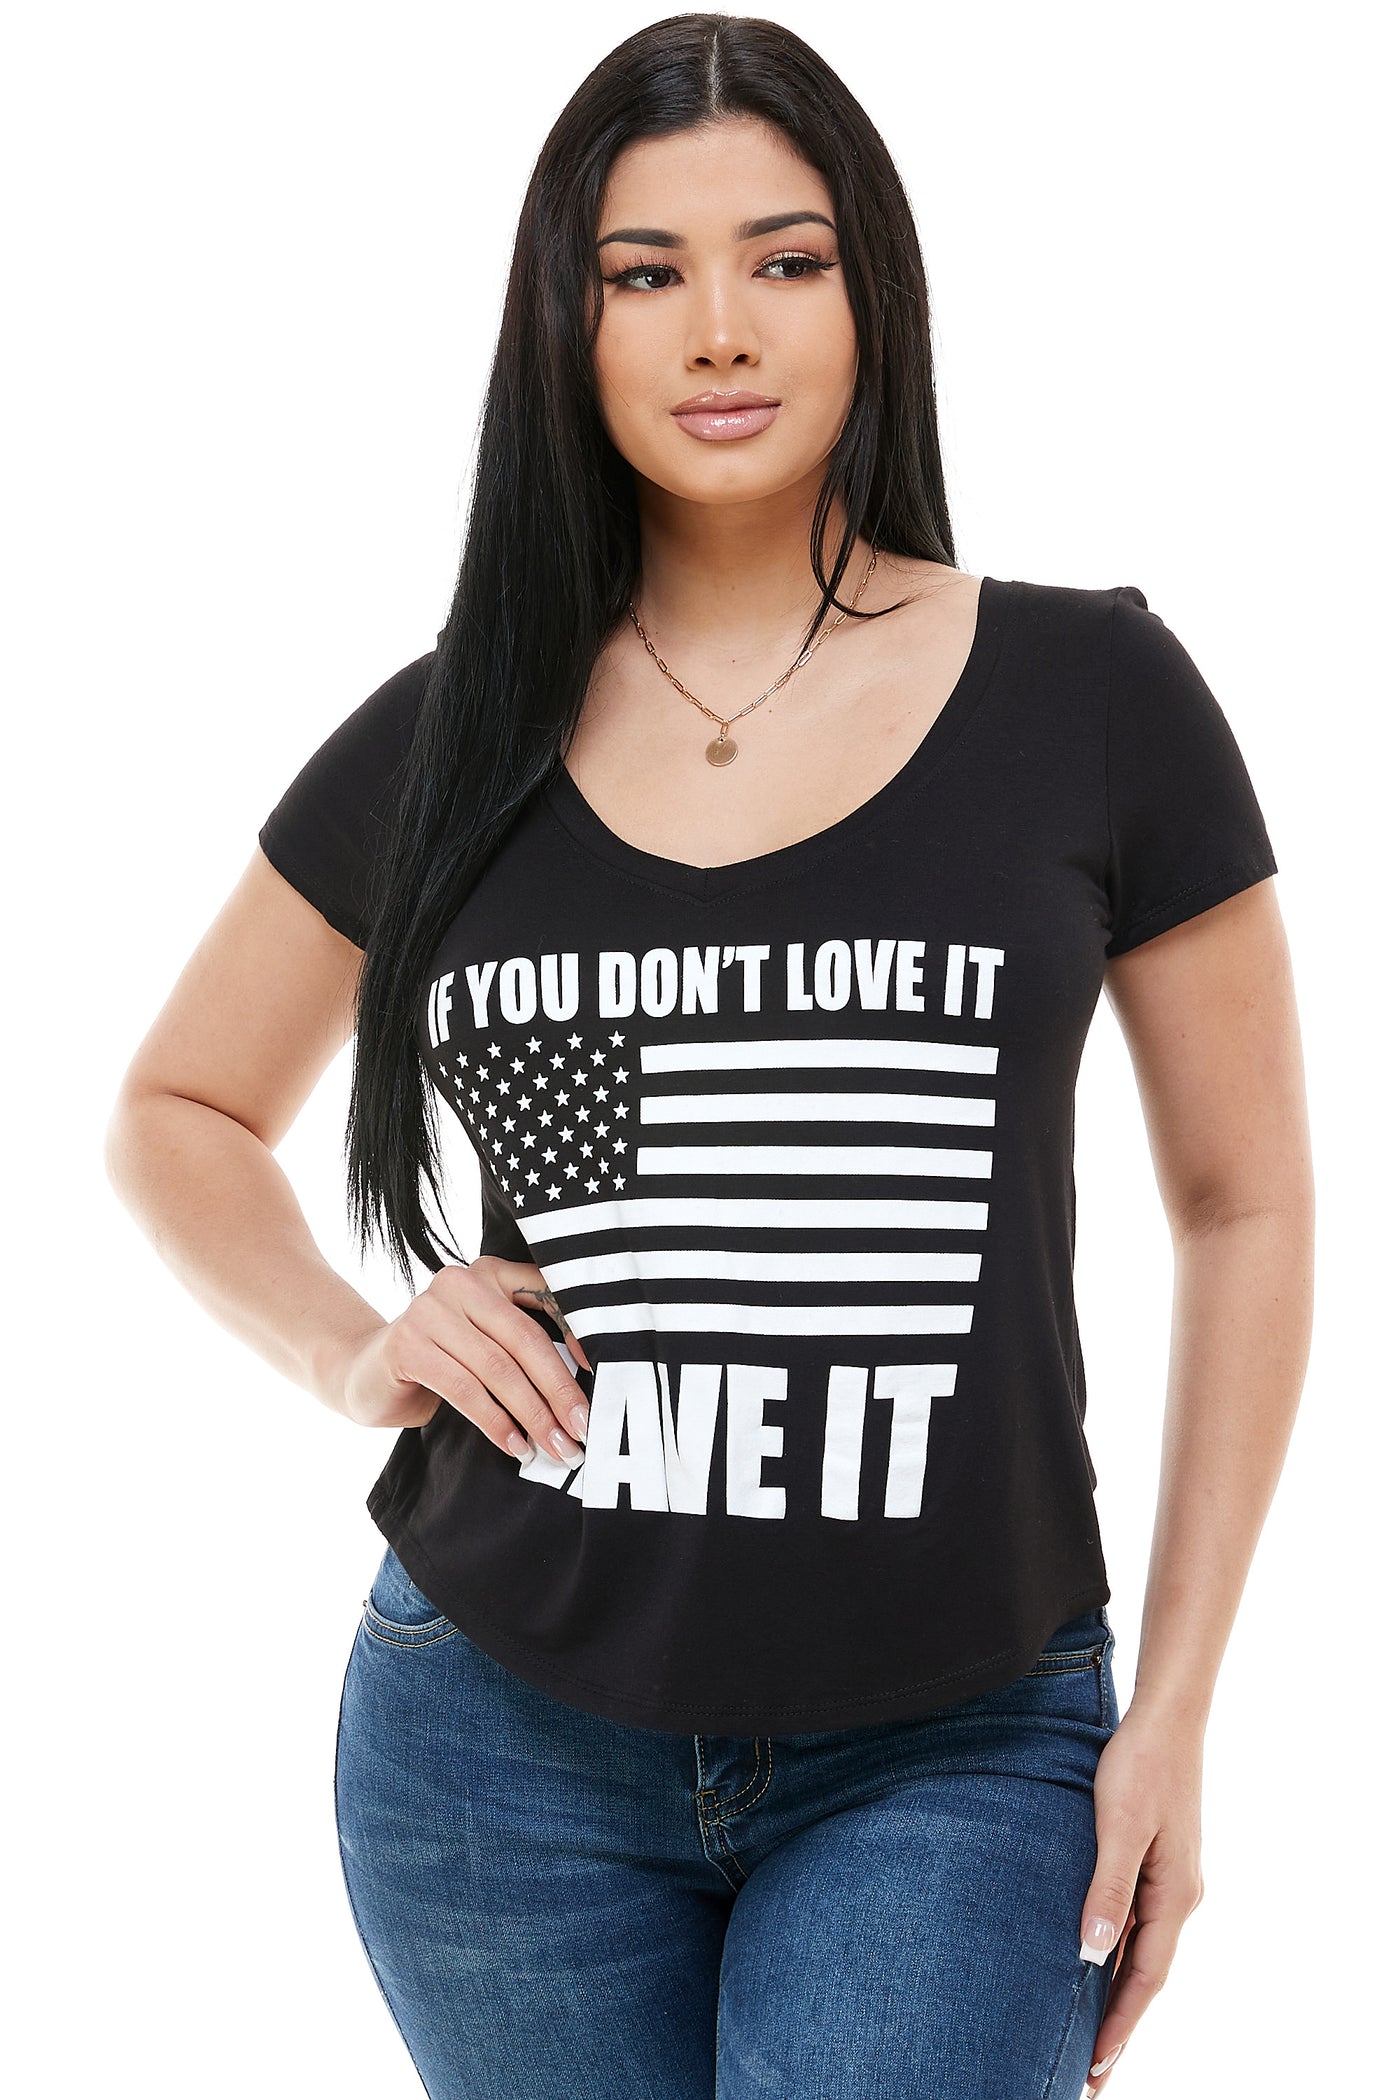 IF YOU DON'T LOVE IT LEAVE IT SHORT SLEEVE V NECK - Trailsclothing.com